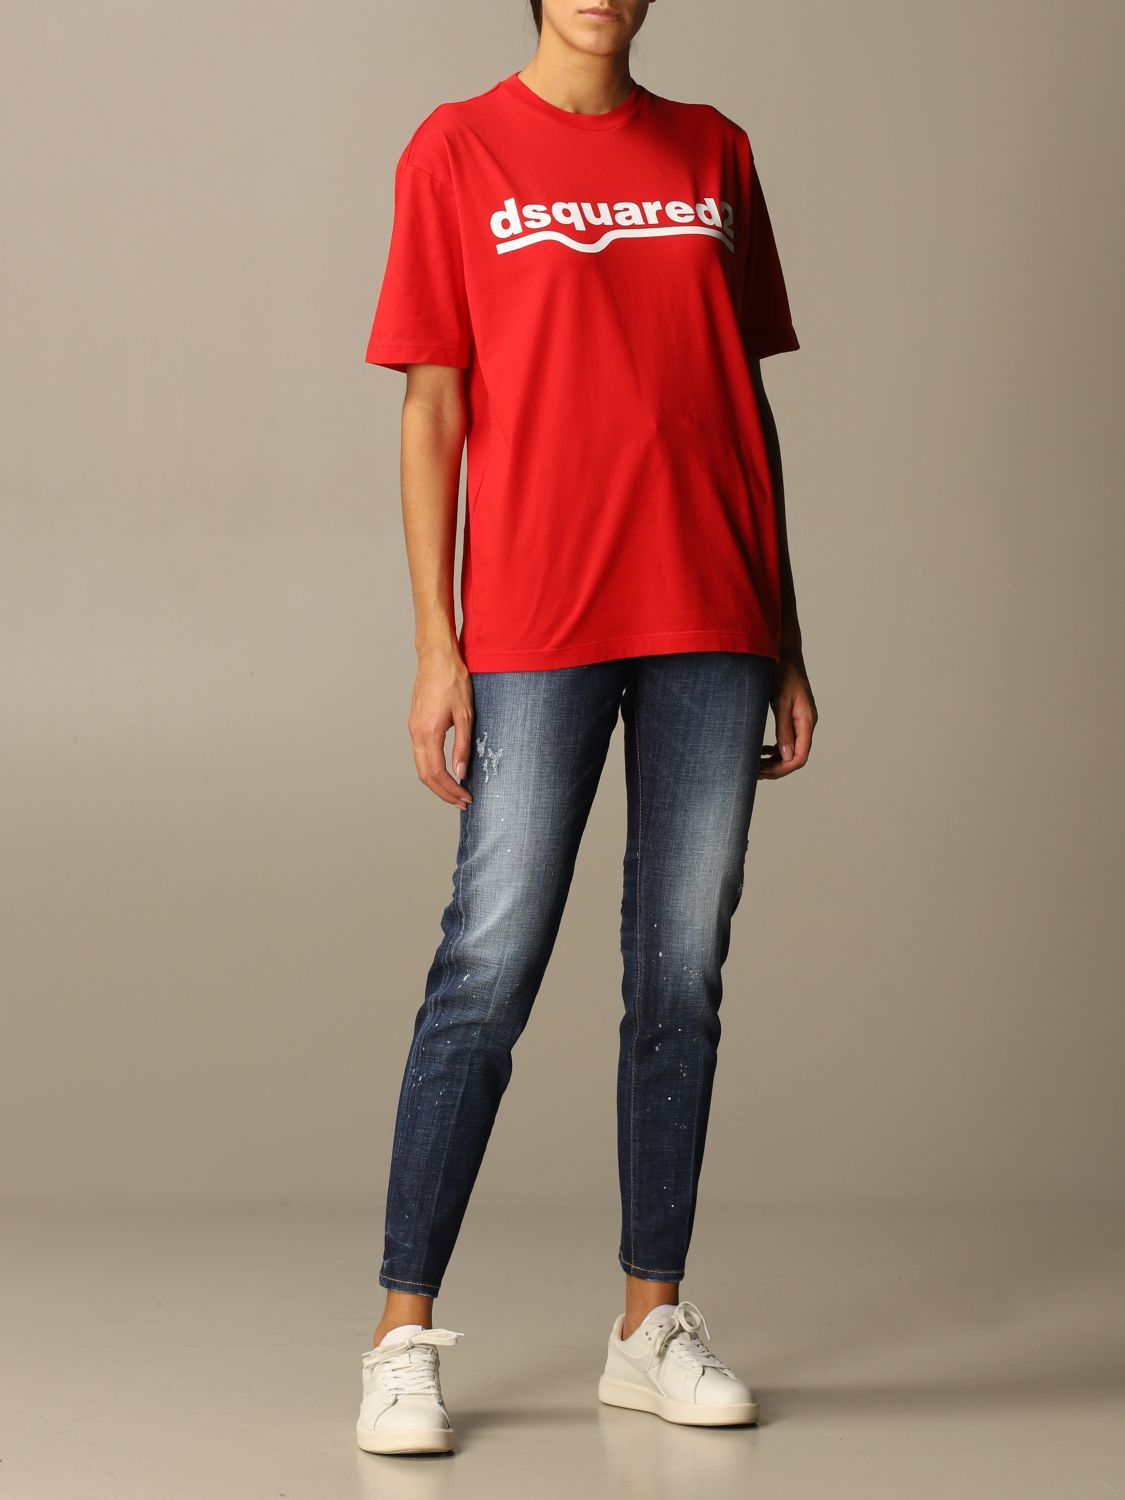 dsquared red t shirt